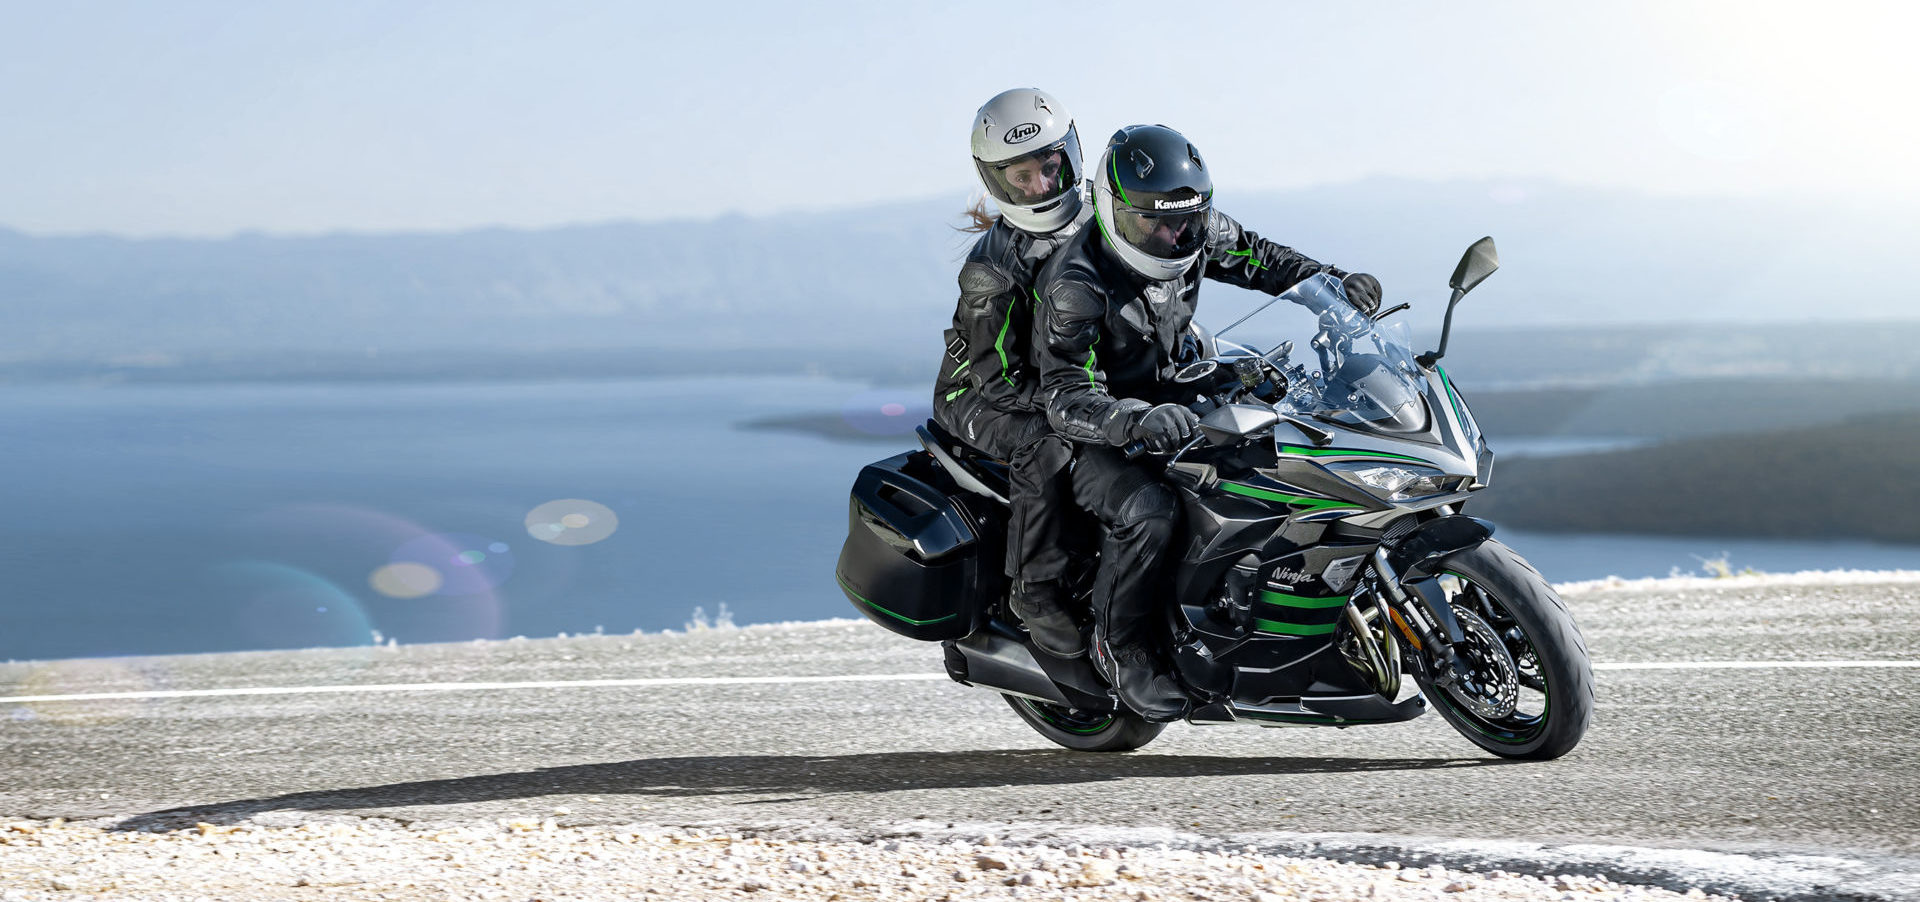 Betydelig Stænke by Kawasaki U.S.A. Launches Home Delivery - Roadracing World Magazine |  Motorcycle Riding, Racing & Tech News